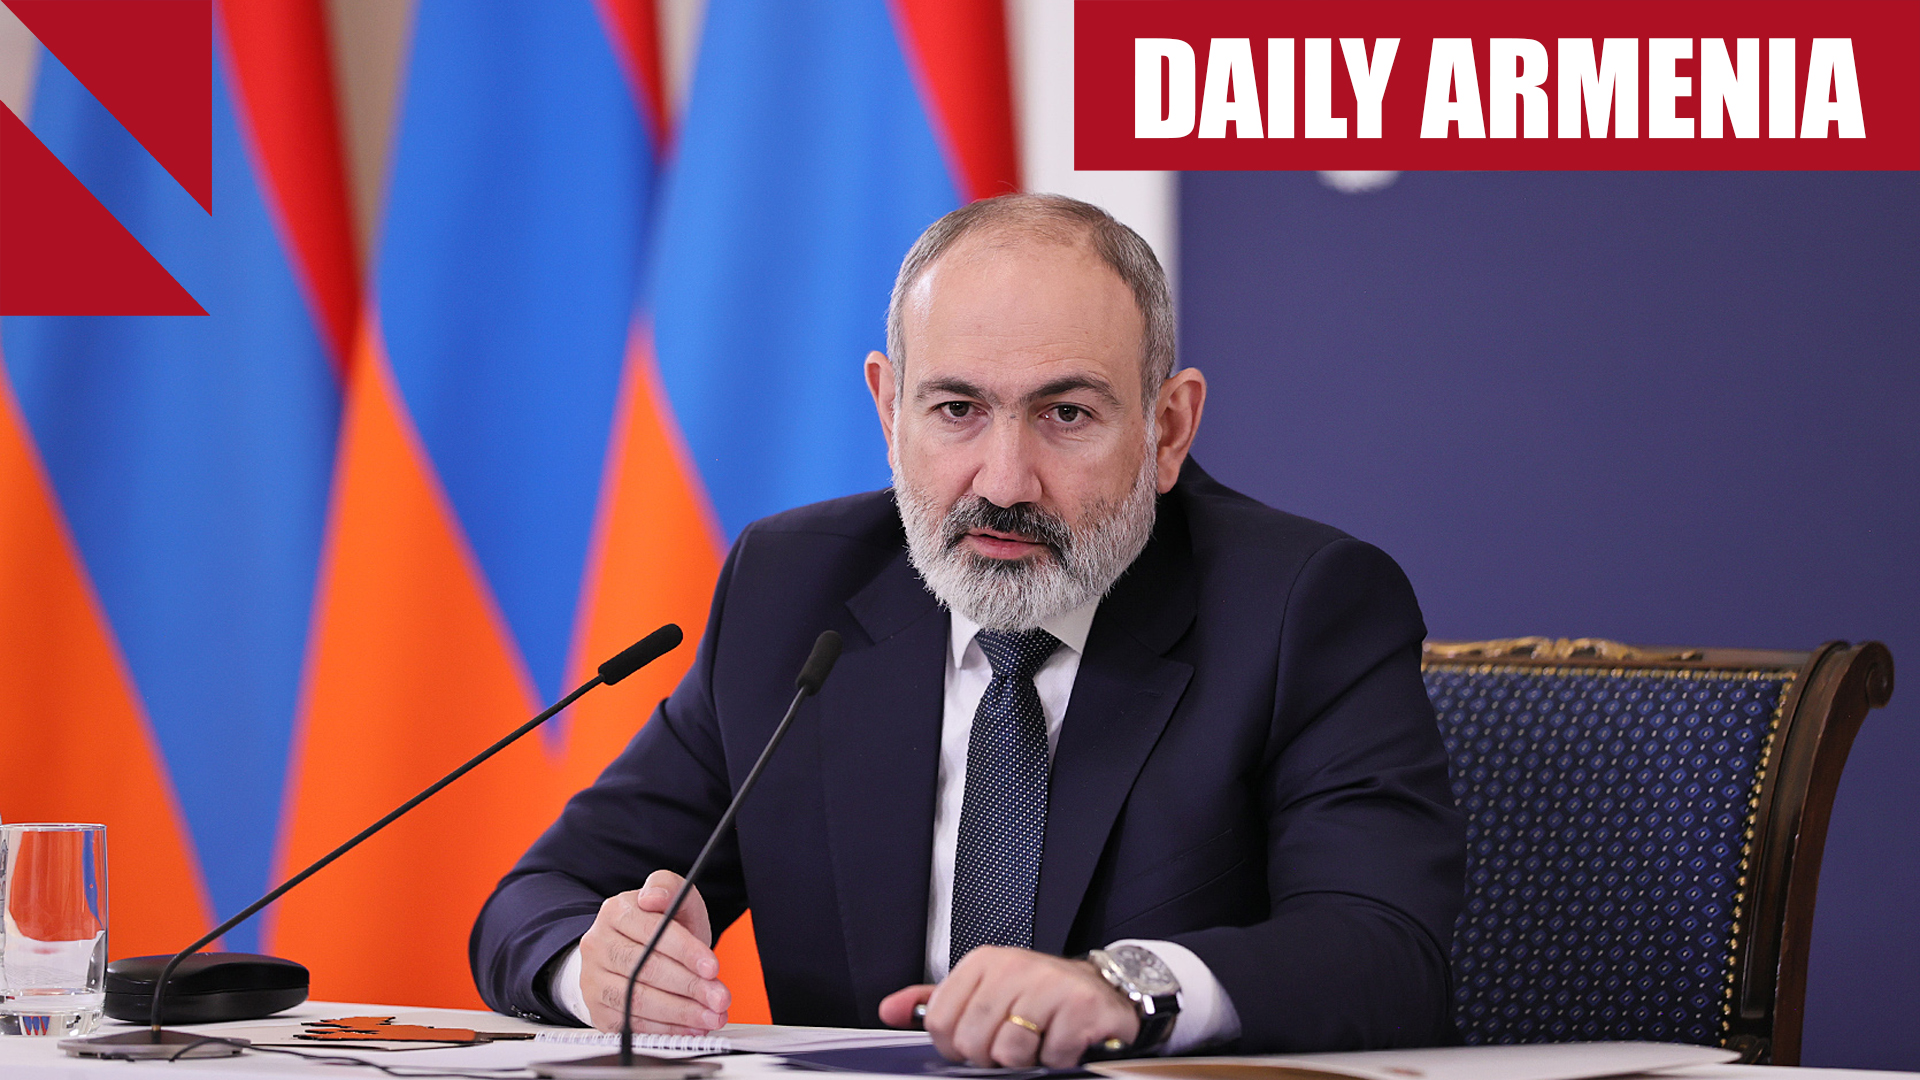 Armenia will leave Russian military bloc if concerns not addressed, says Pashinyan